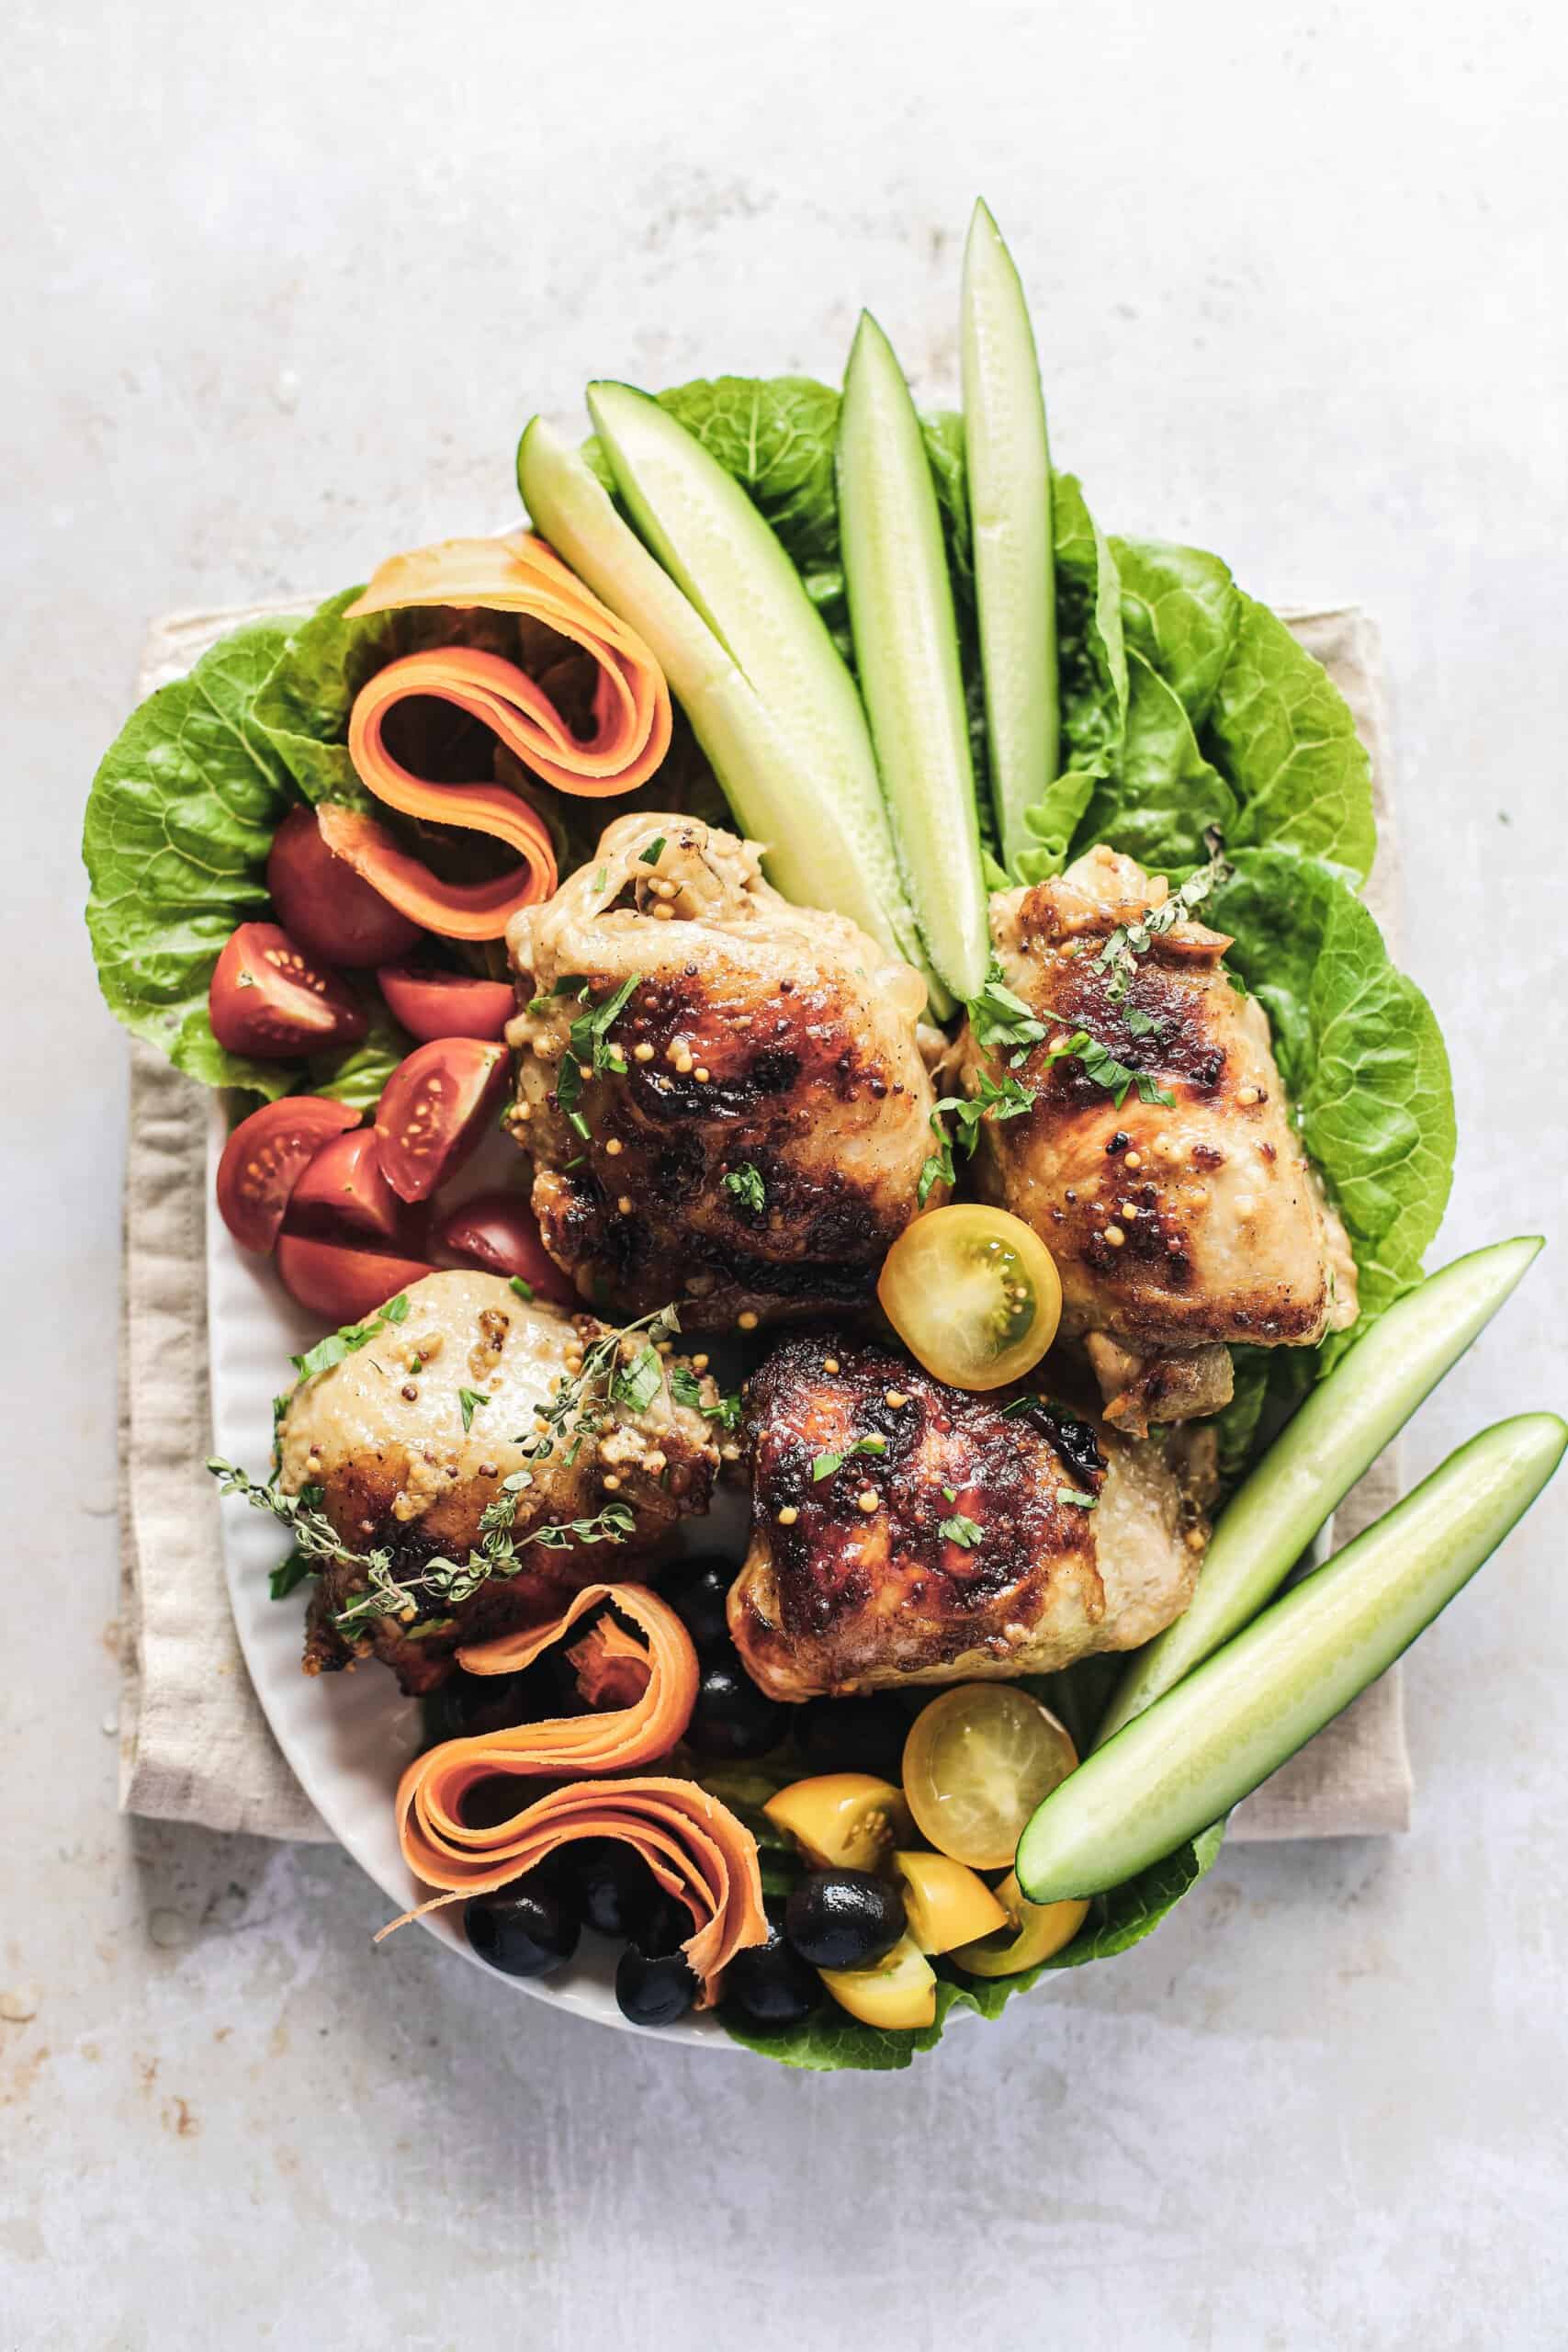 Four roasted chicken thighs on a serving platter with fruits and greens